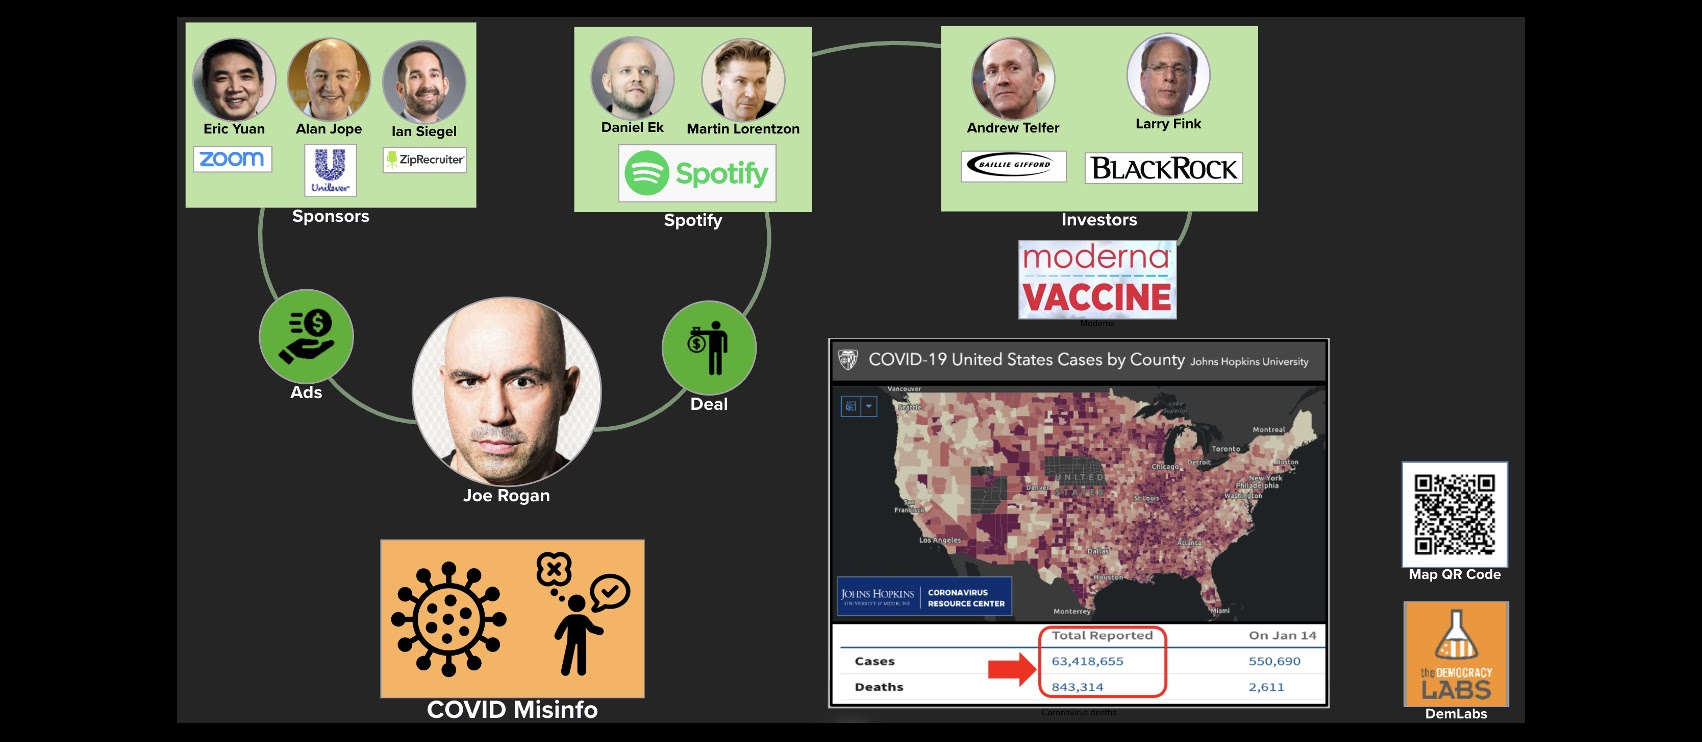 Follow the blood money Spotify makes streaming COVID misinfo as hundreds of Americans die every day